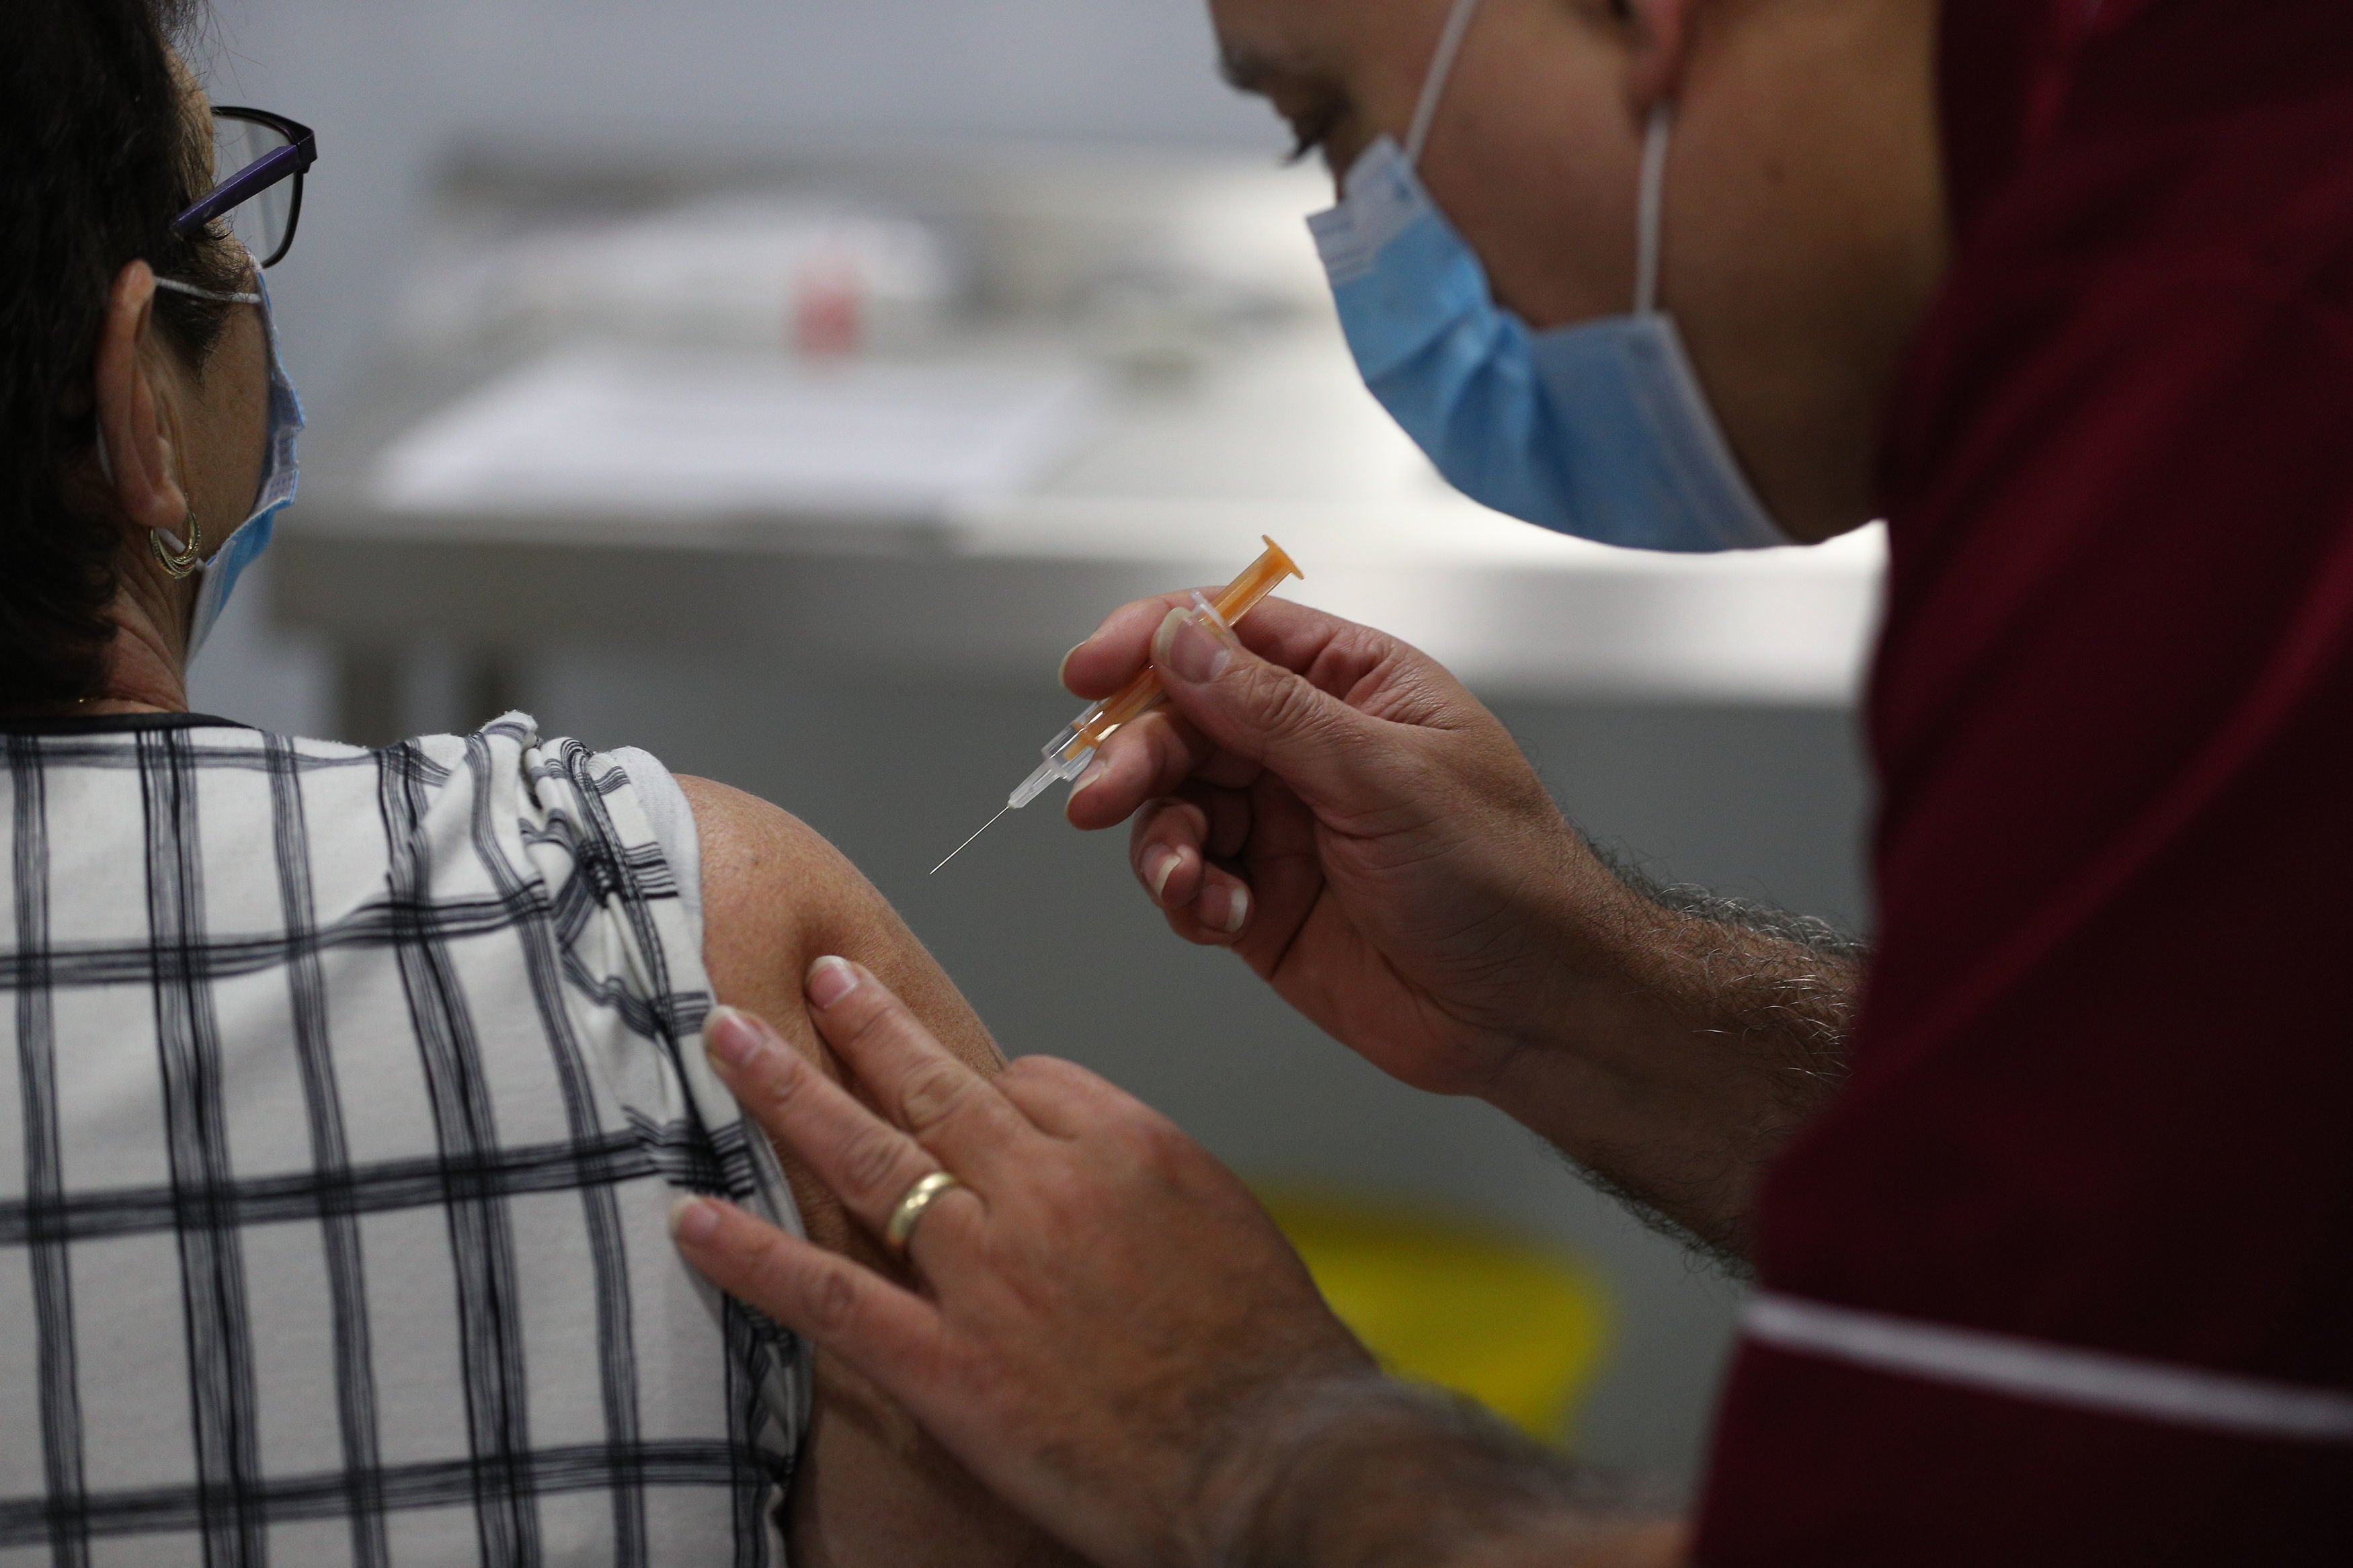 A person receives a does of the Oxford/Astrazeneca coronavirus vaccine during a clinic at the Winter Gardens in Blackpool, which has been converted for use as a covid vaccination centre on 25 January, 2021. A clinic in Georgia has lost access to vaccine supplies after inoculating school workers.